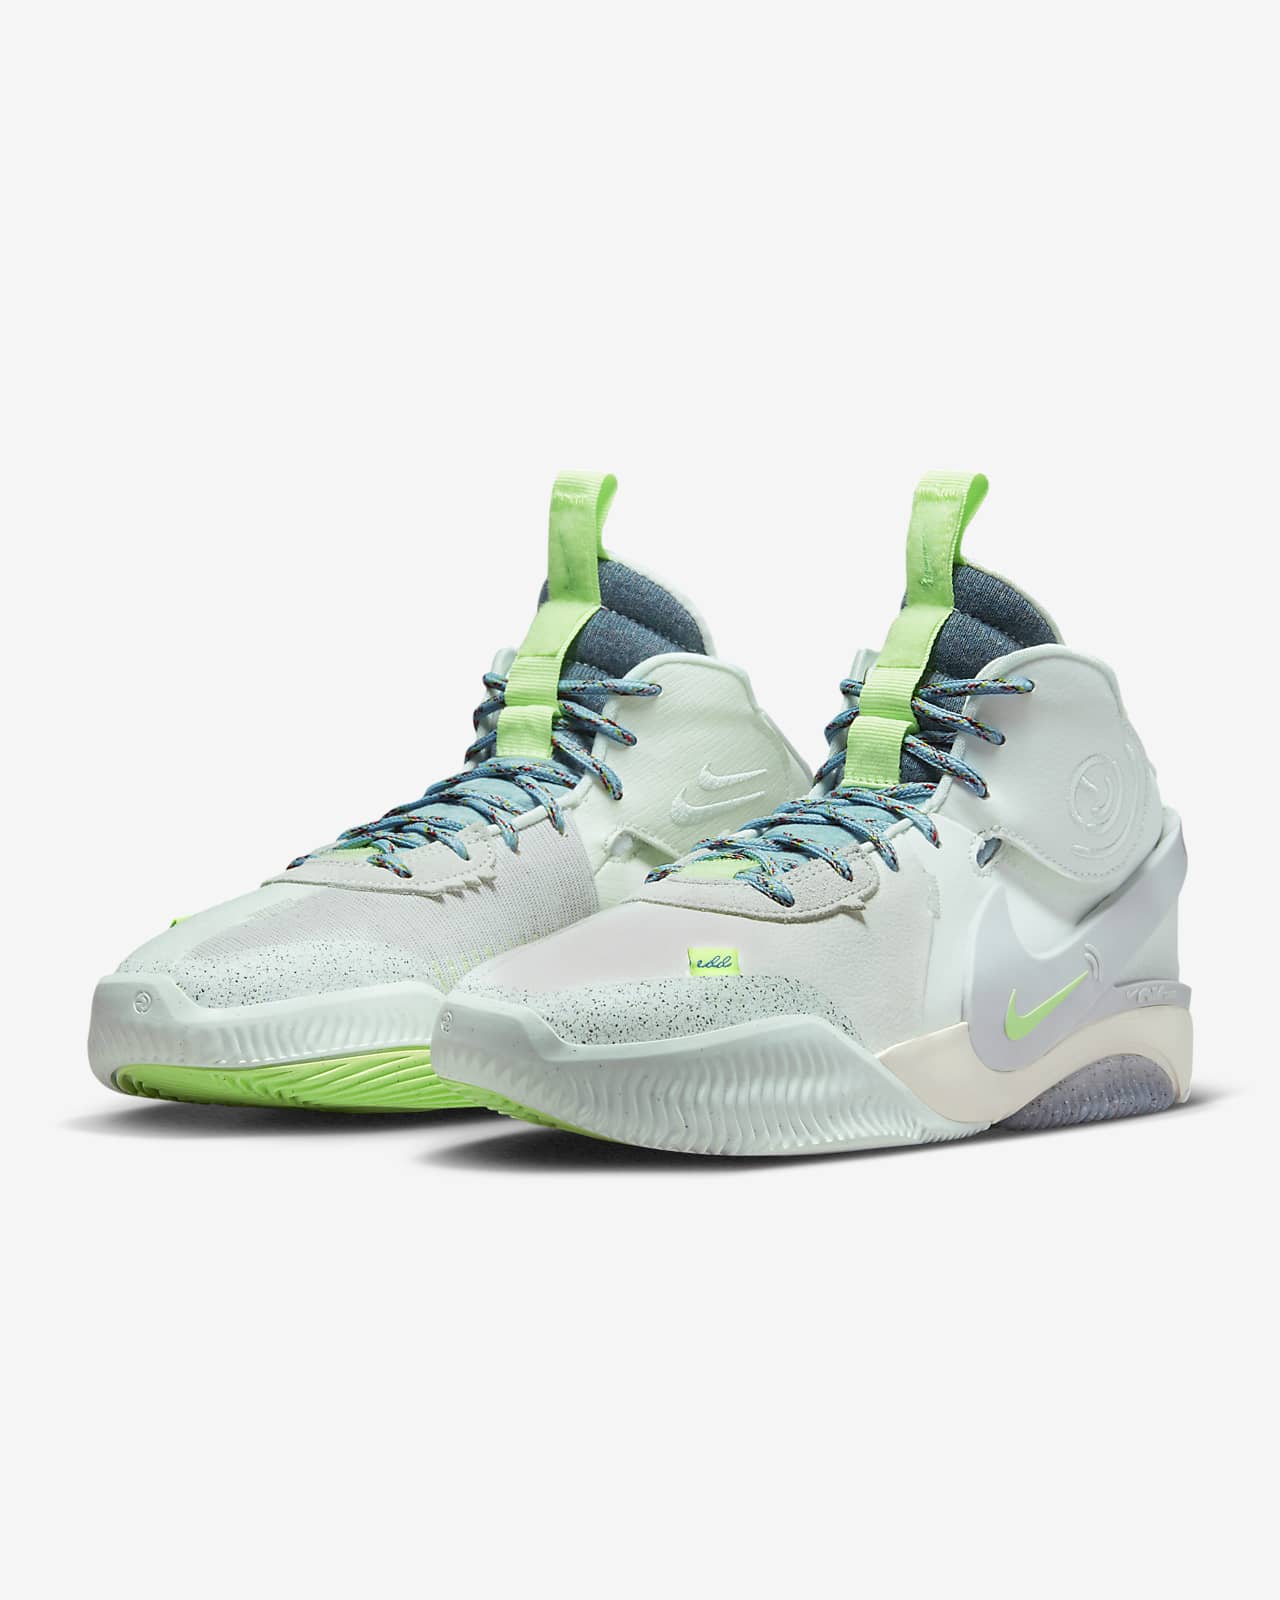 air-deldon-lyme-easy-on-off-basketball-shoes-mWJmPk.png